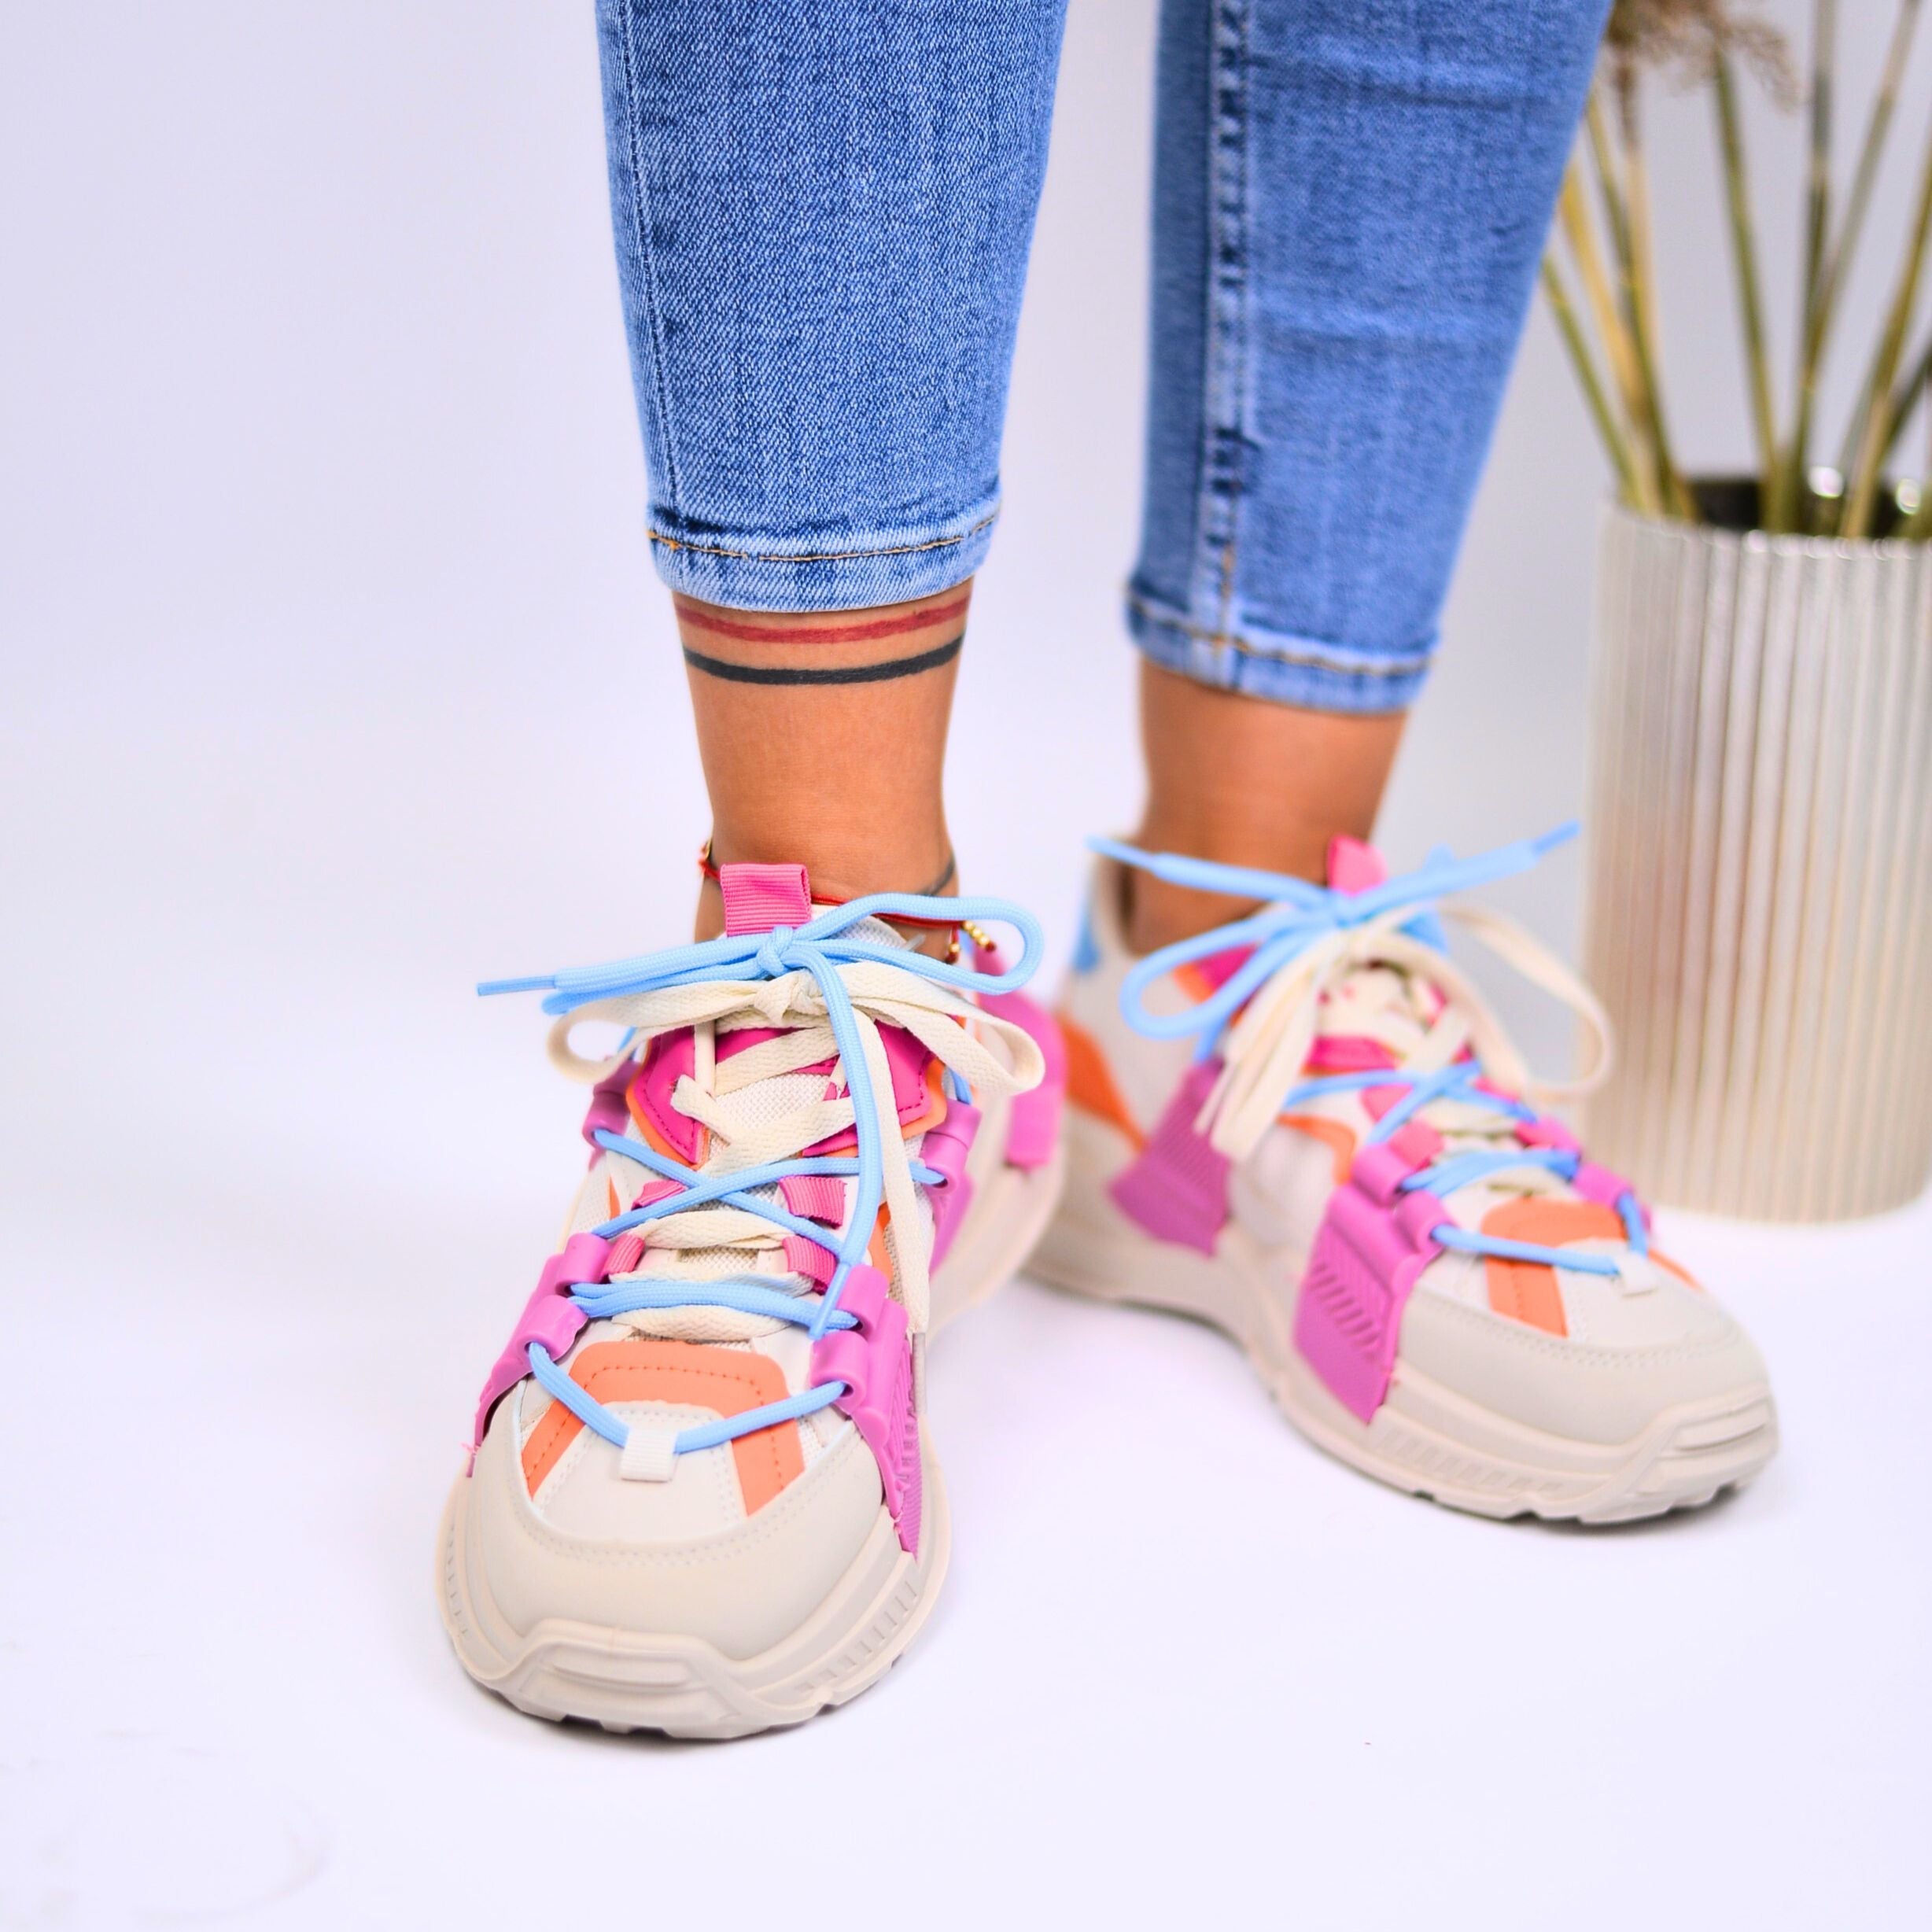 Women's Pink Dolce Sneakers Made Of Ecological Leather And Textile Material